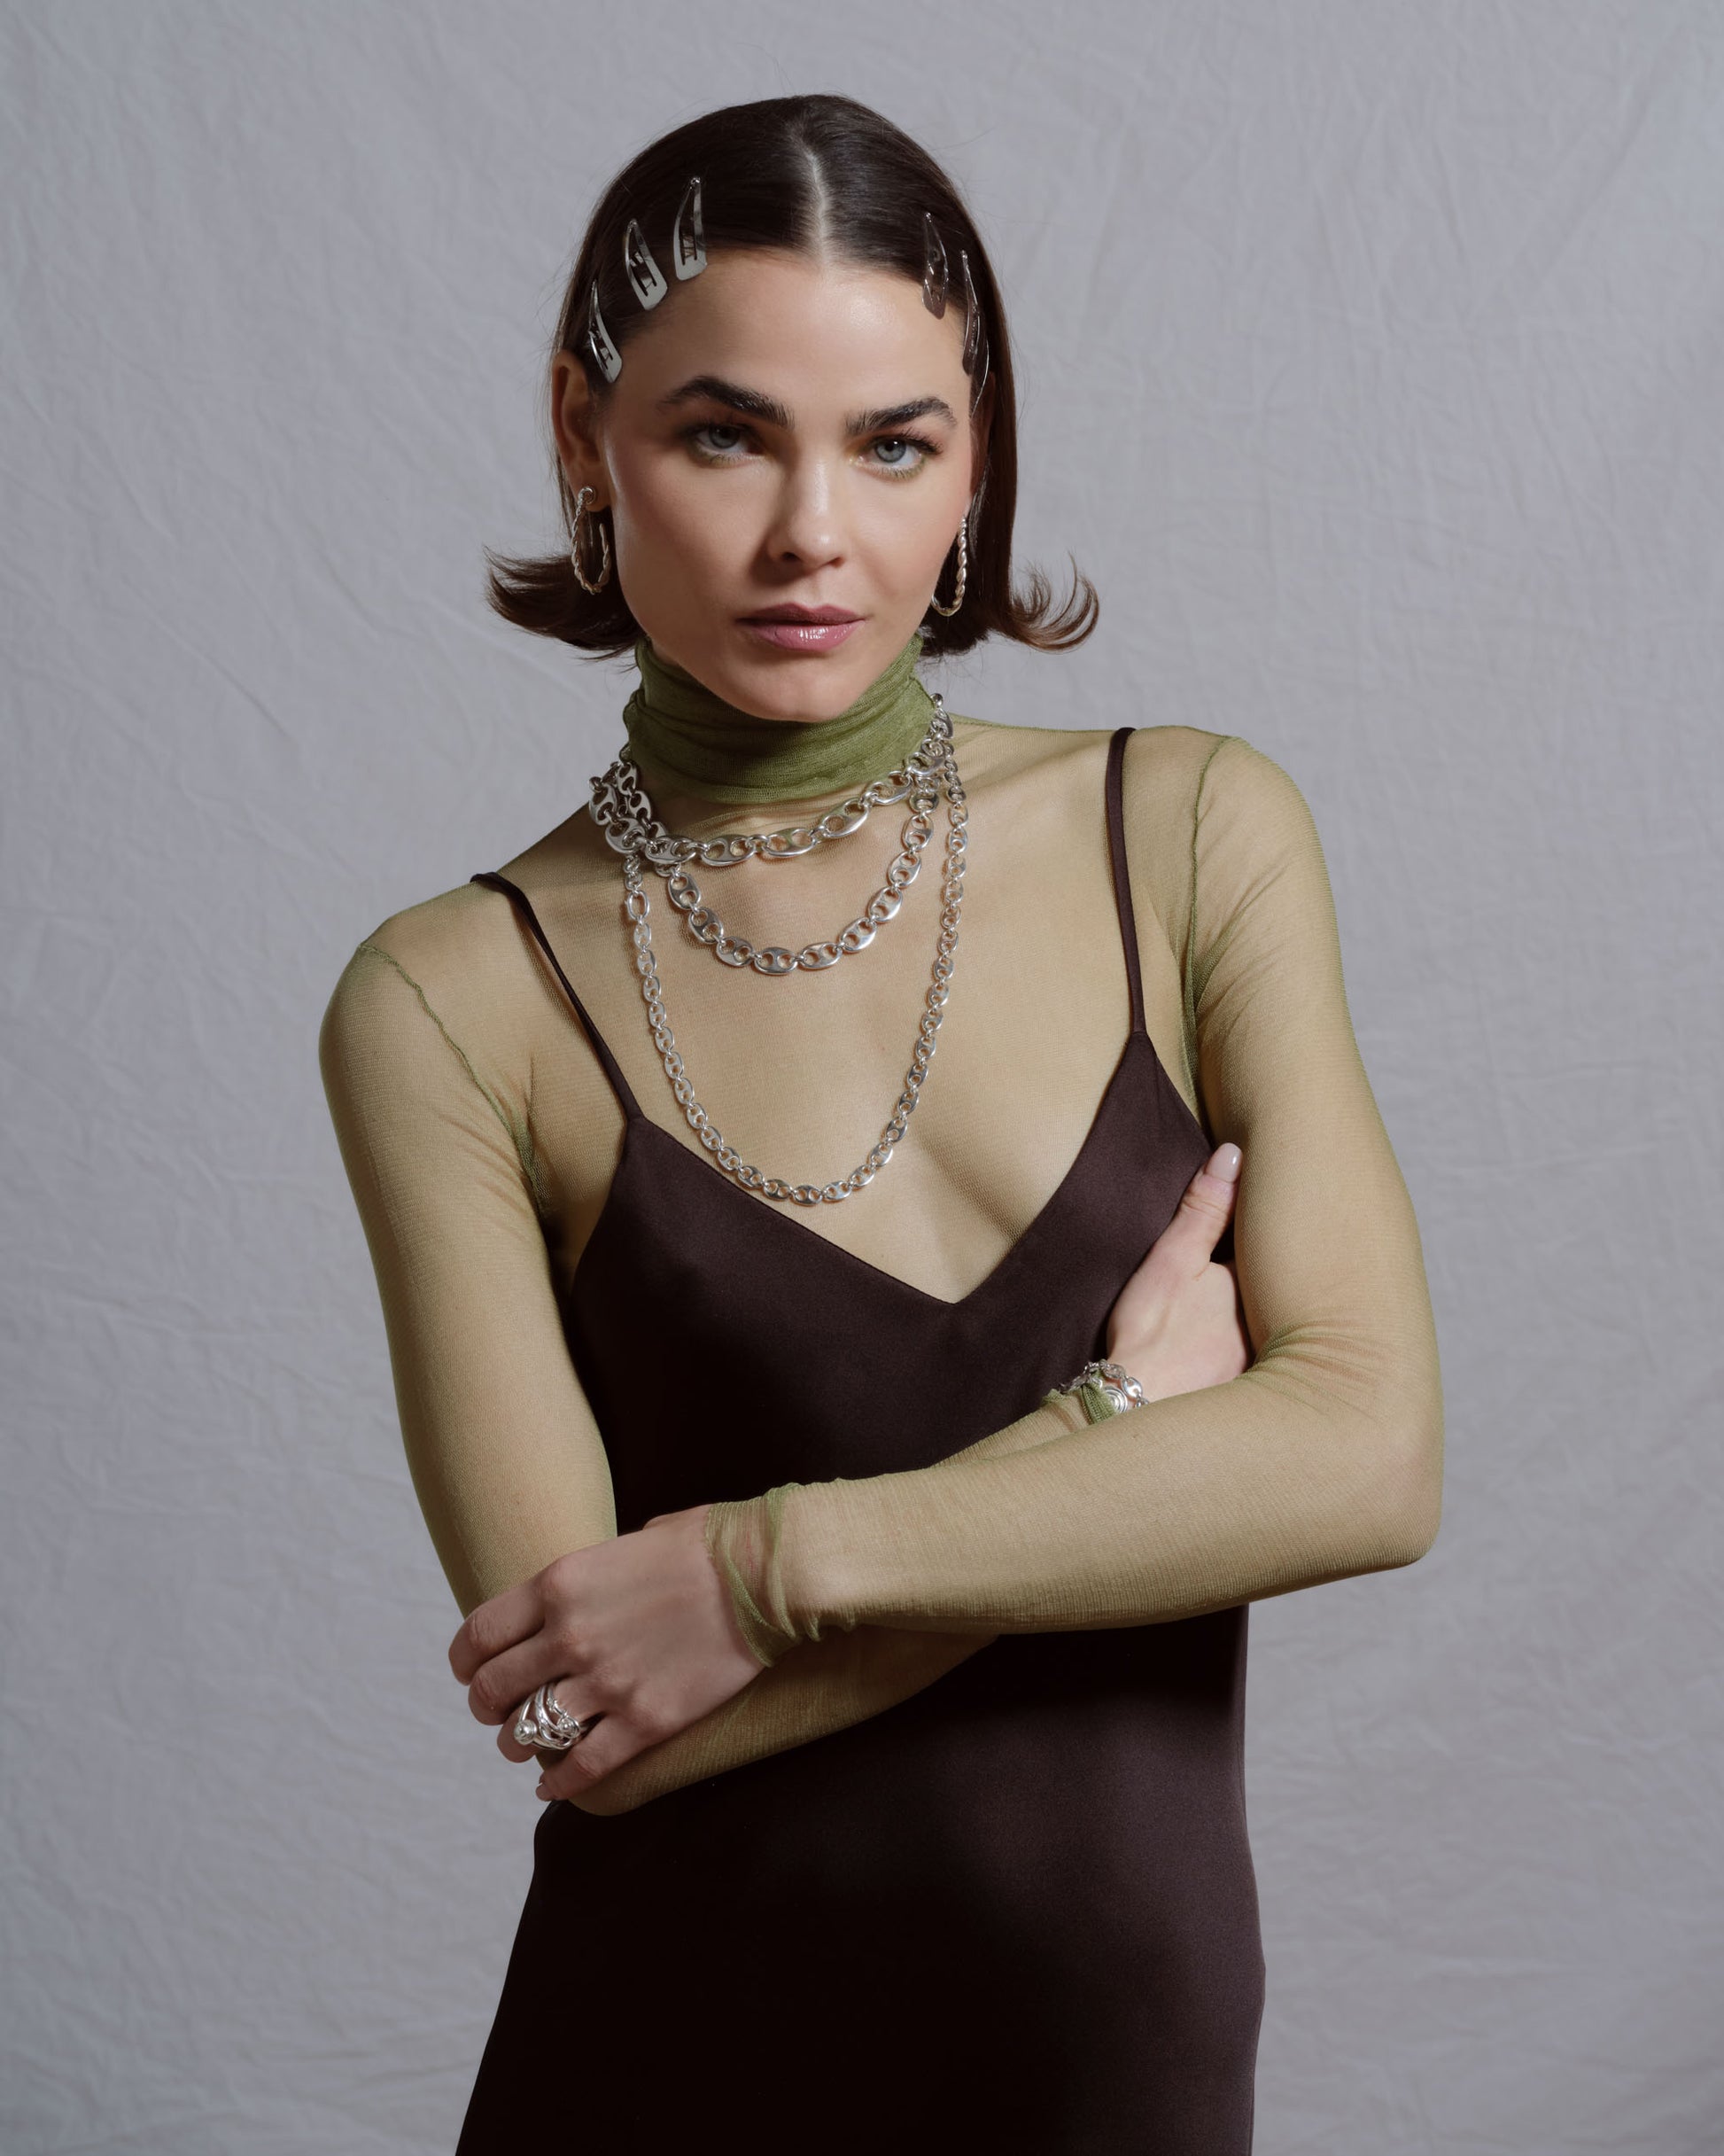 Styled image featuring CRZM jewelry on model.